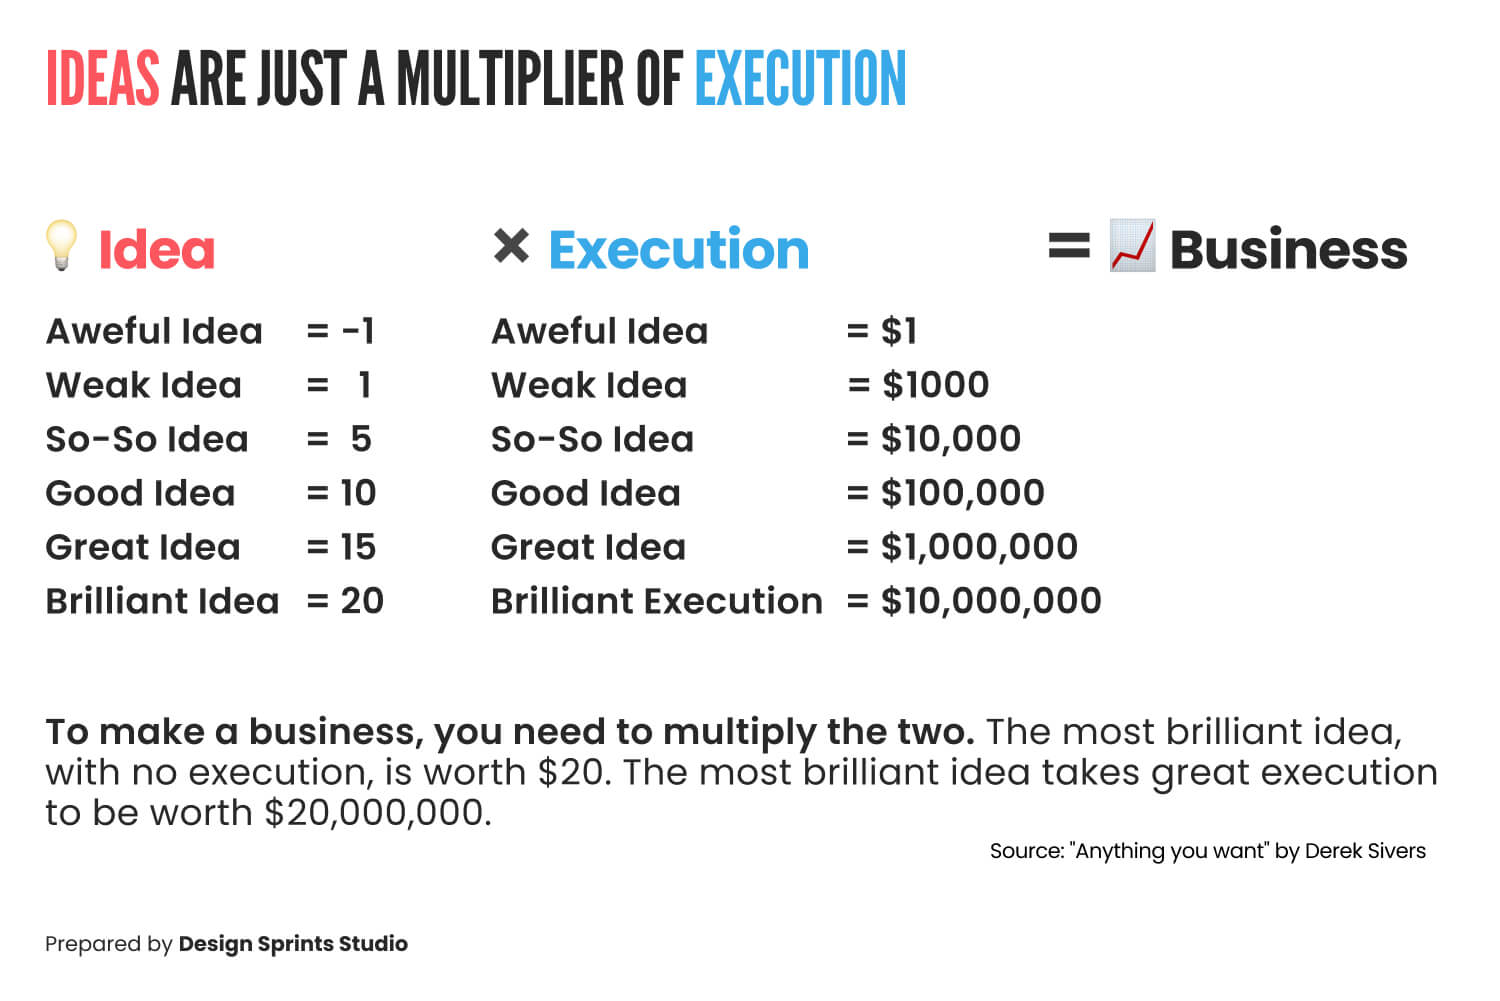 Ideas are just a multiplier of execution